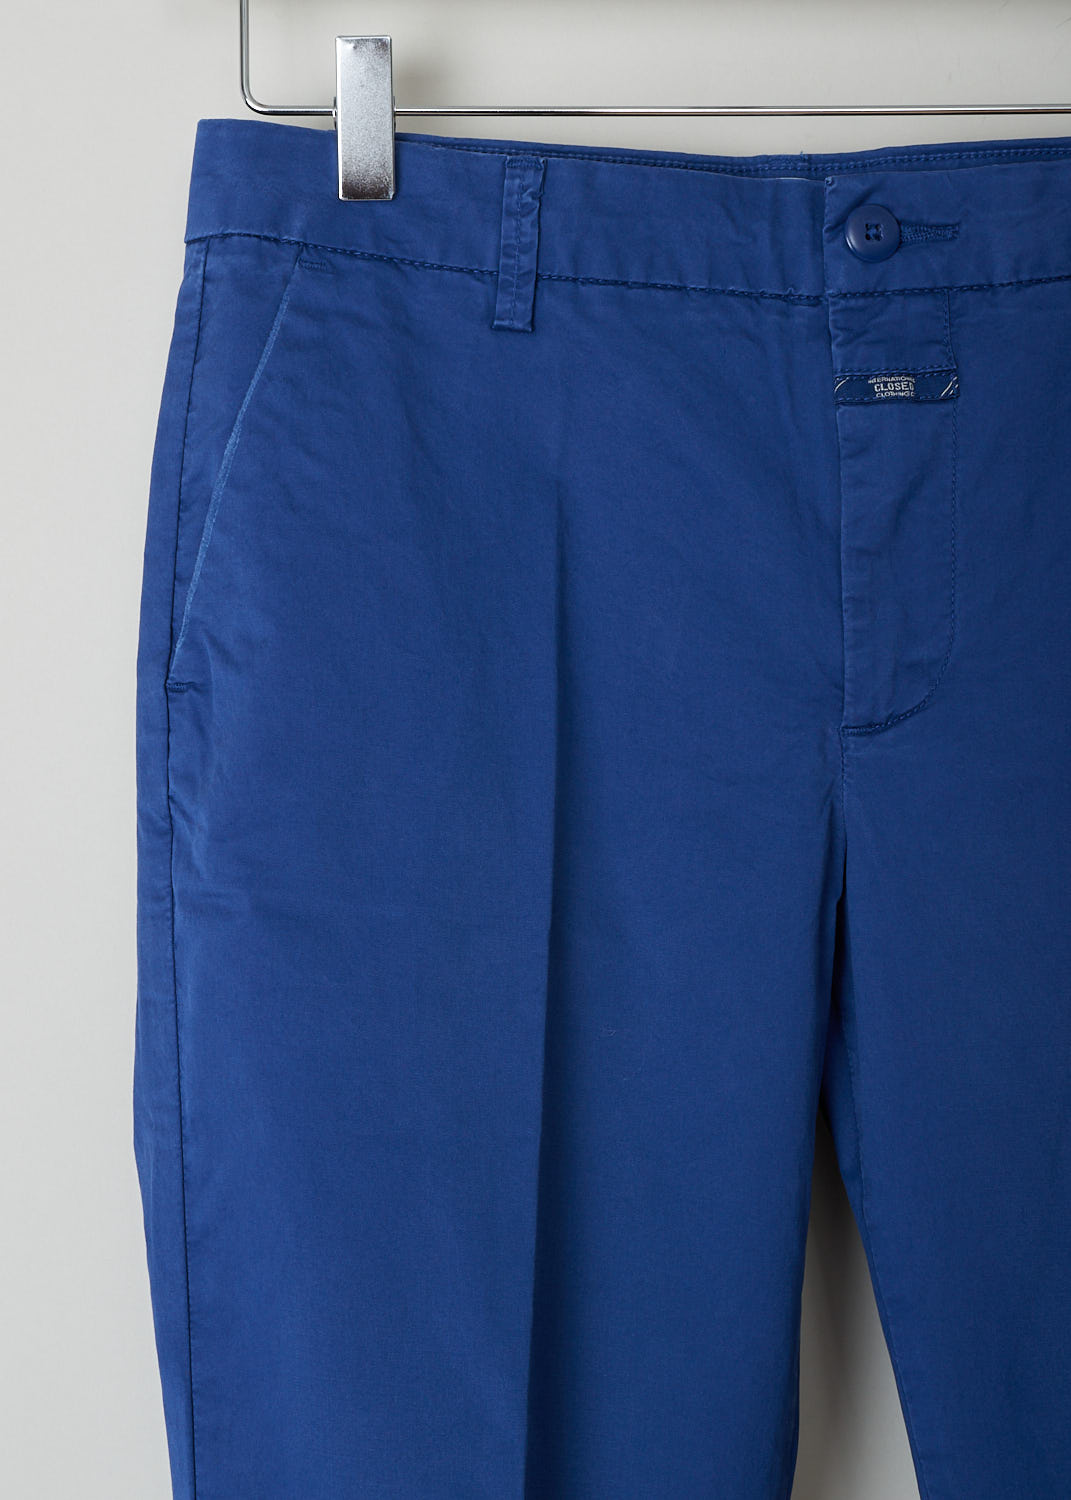 CLOSED CLASSIC BLUE TROUSERS STEWART_C91796_53S_SR_582 Blue Detail, These classic trousers in blue feature belt loops and a zipper and button closure. They feature slanted pockets on the front and two buttoned welt pockets on the back. What makes this model stand out the is the broad fold-over hem.